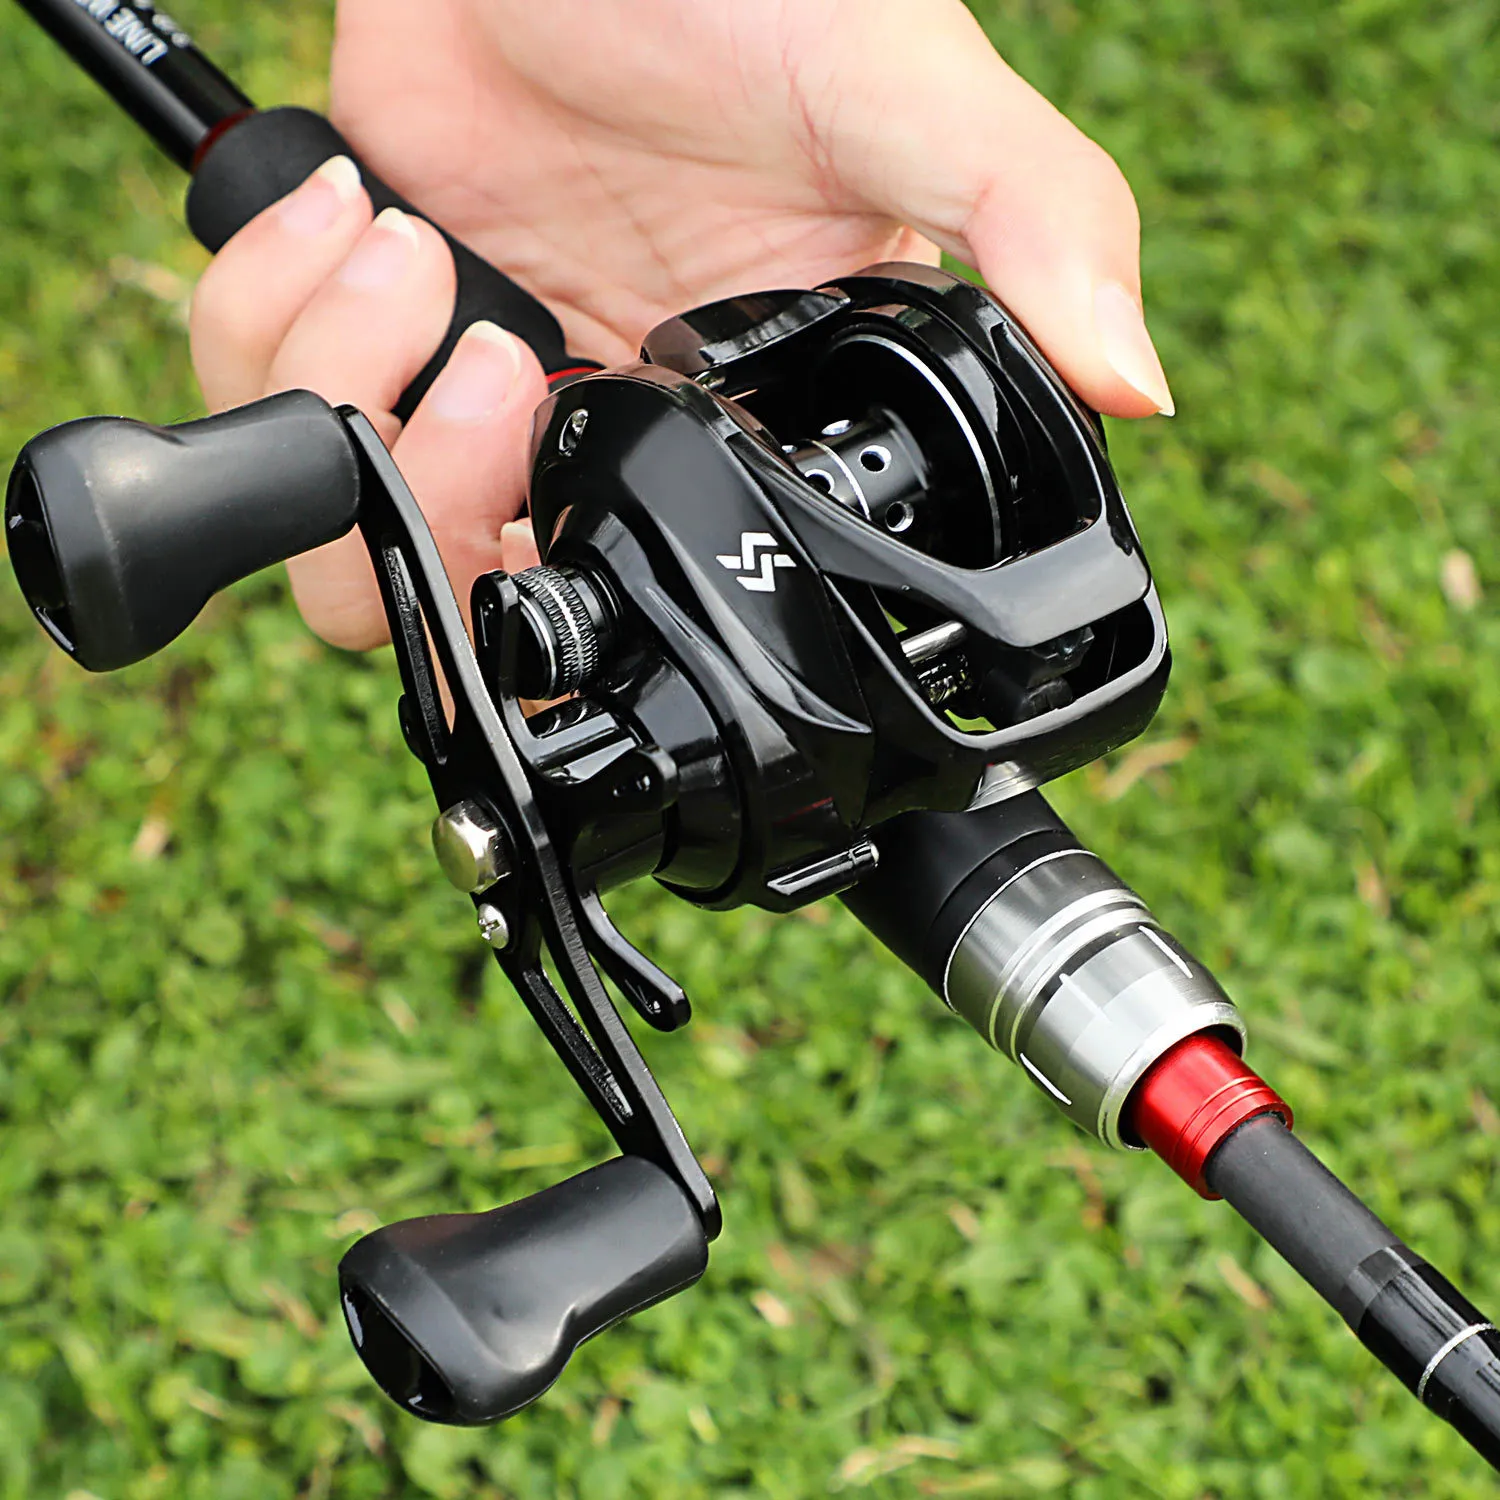 Sougayilang Full Kit Fishing Rod Lightweight Carbon Fiber Best Ultralight  Baitcasting Rod Combo With Baitcasting Reel And Fishing Line From Dao05,  $32.22